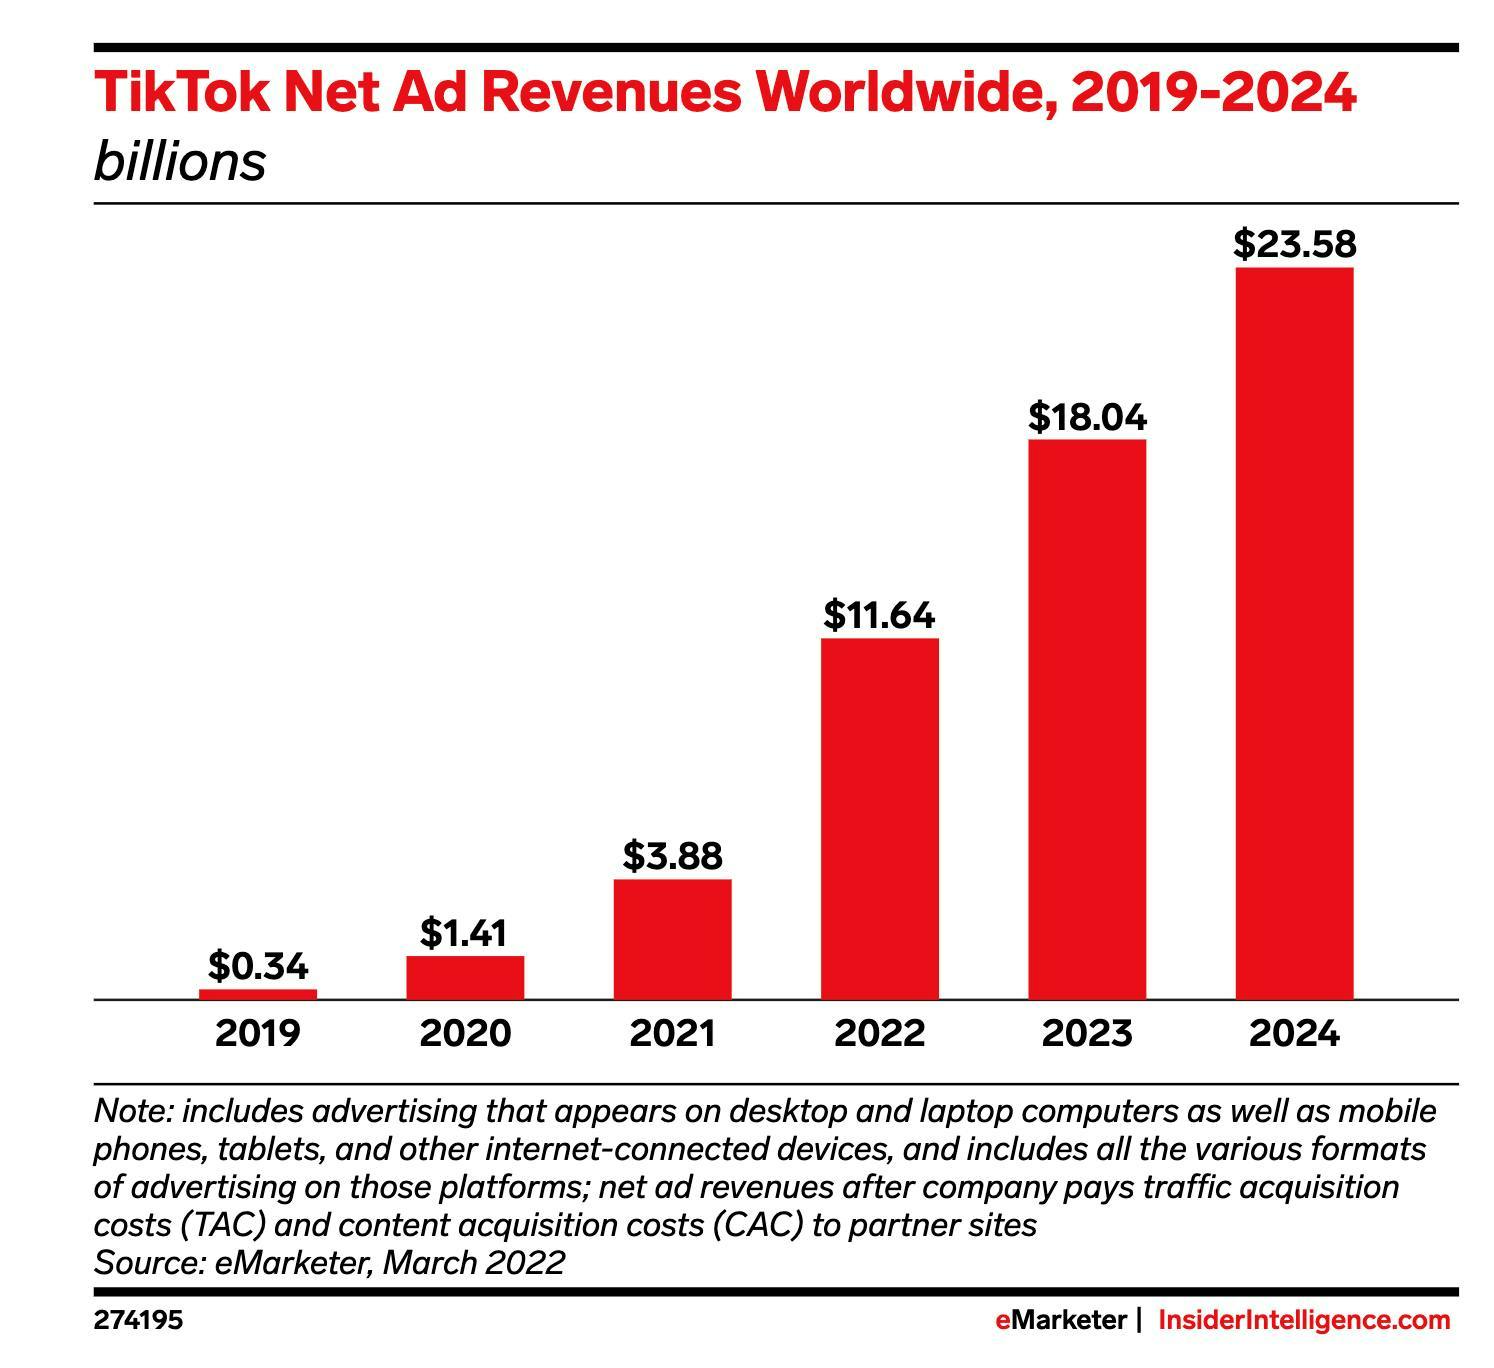 A chart of TikTok Net Ad Revenues Worldwide from 2019 to 2024 showing a projected value of $23.58 billion in 2024.